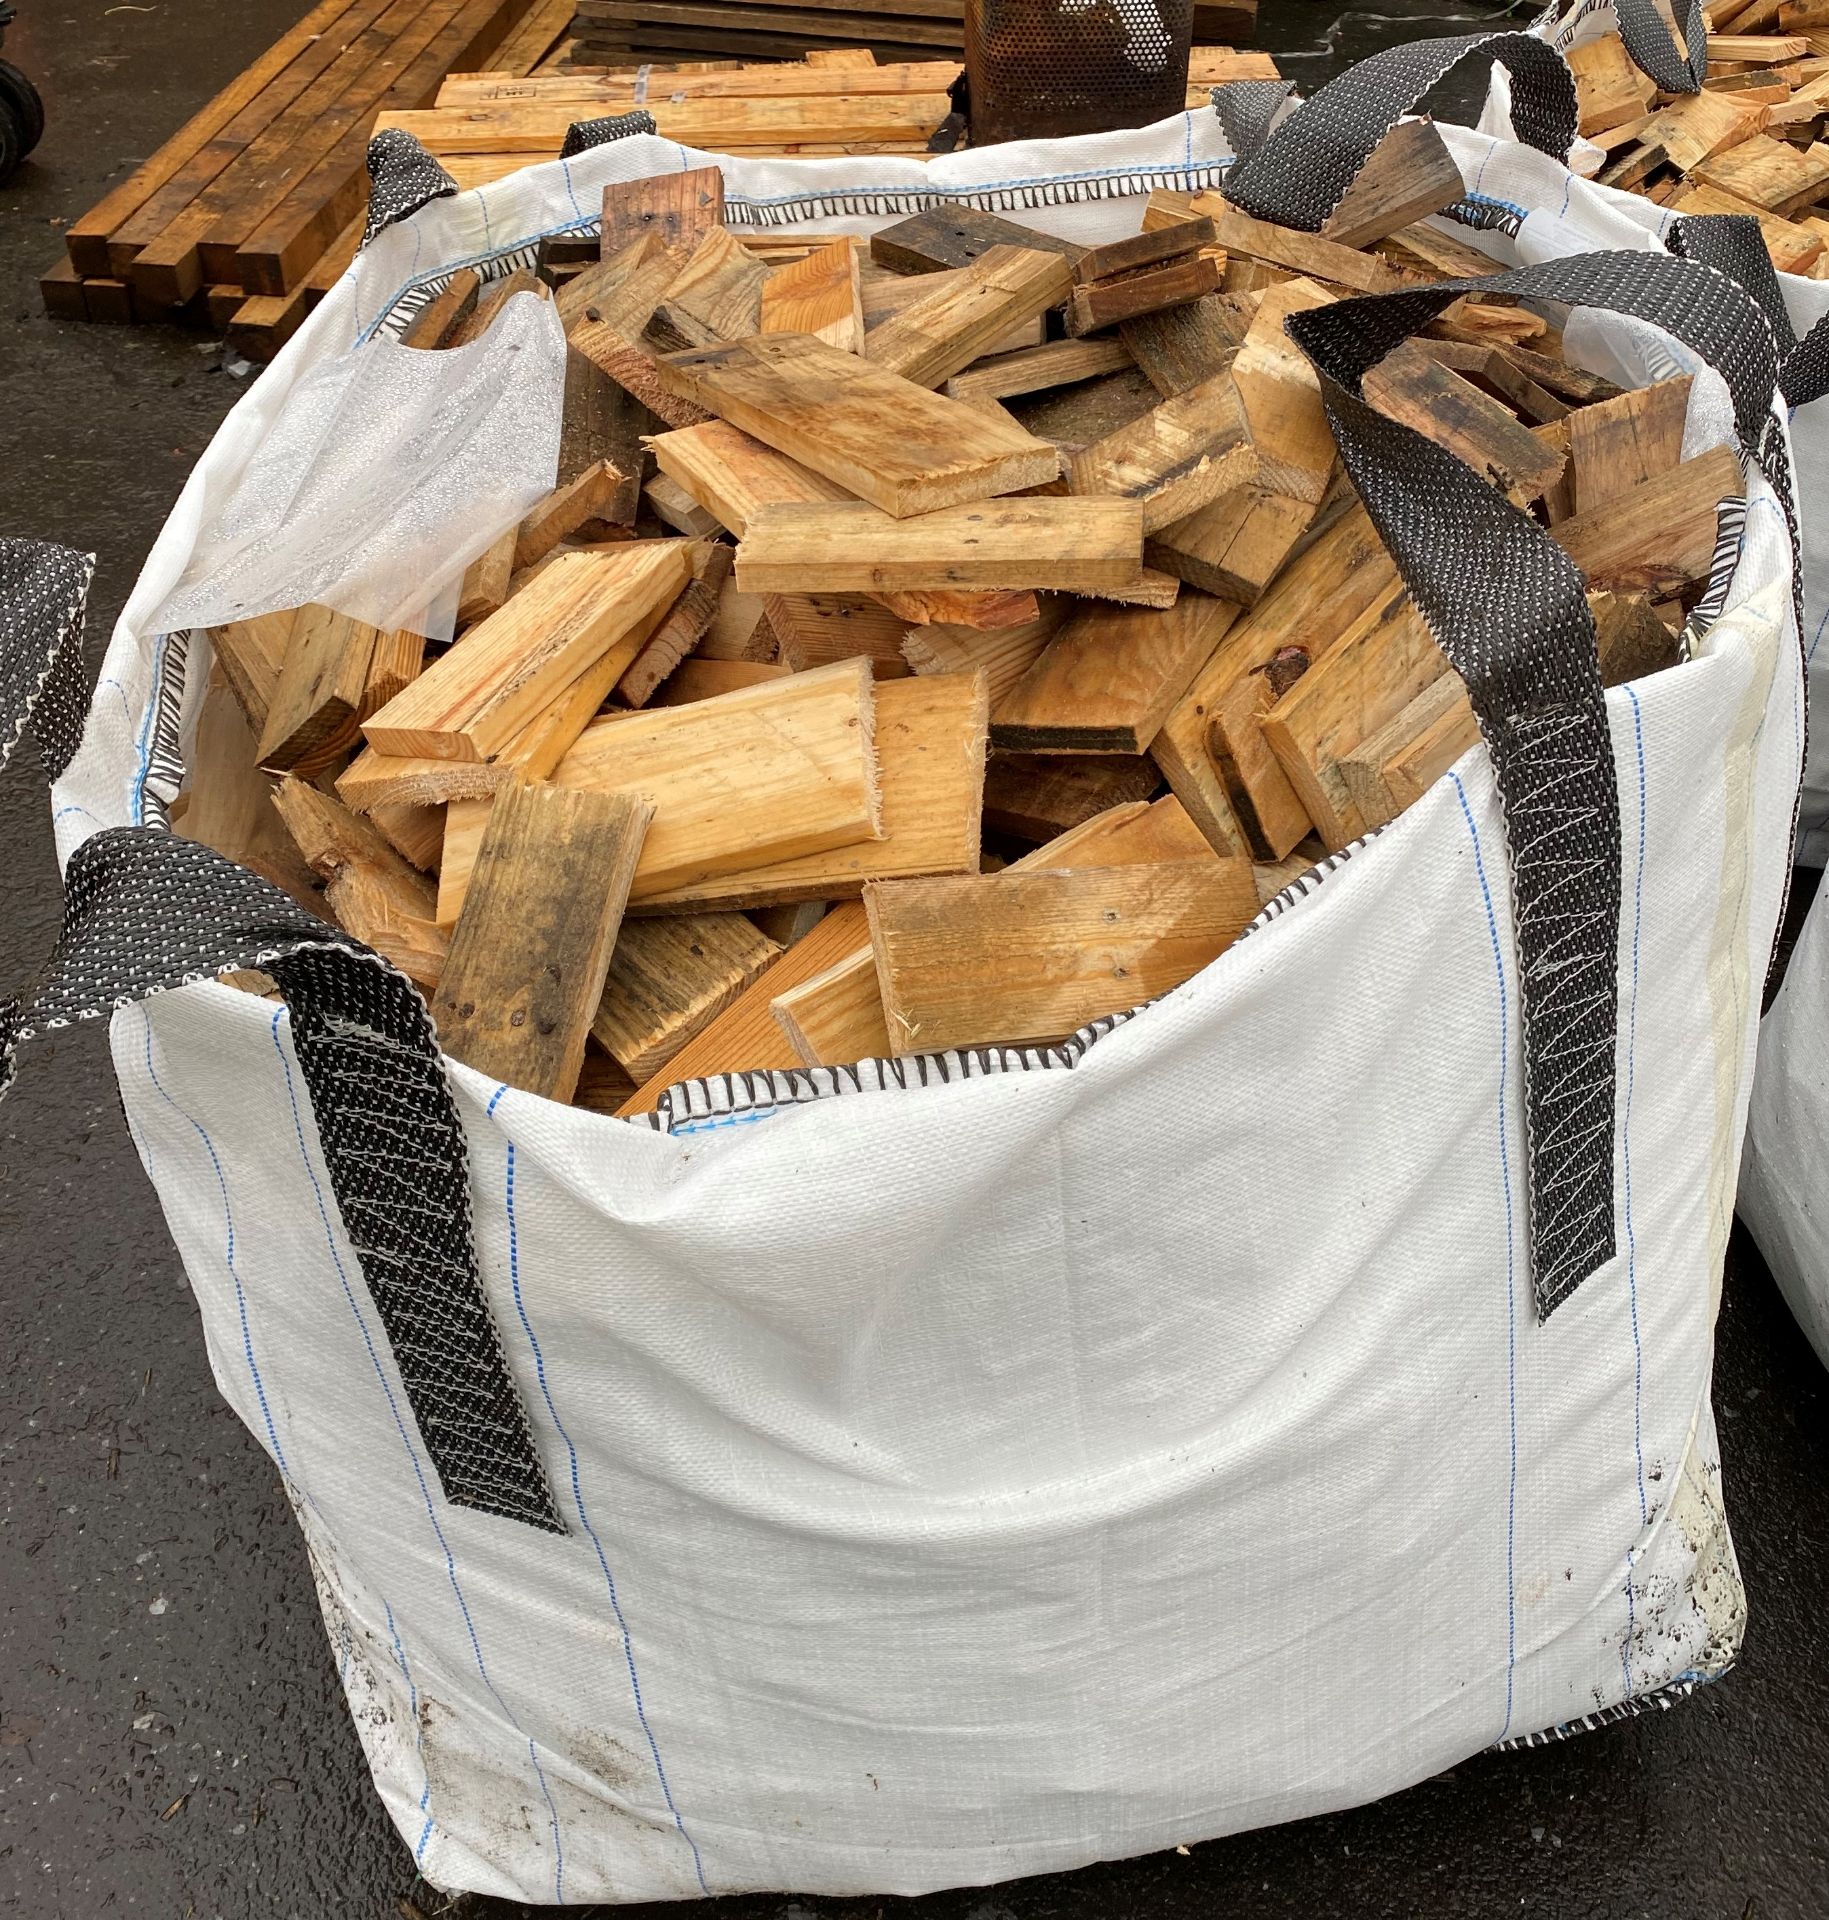 A one tonne bag containing kindling (image is for example only) ** Please note - this lot is to be